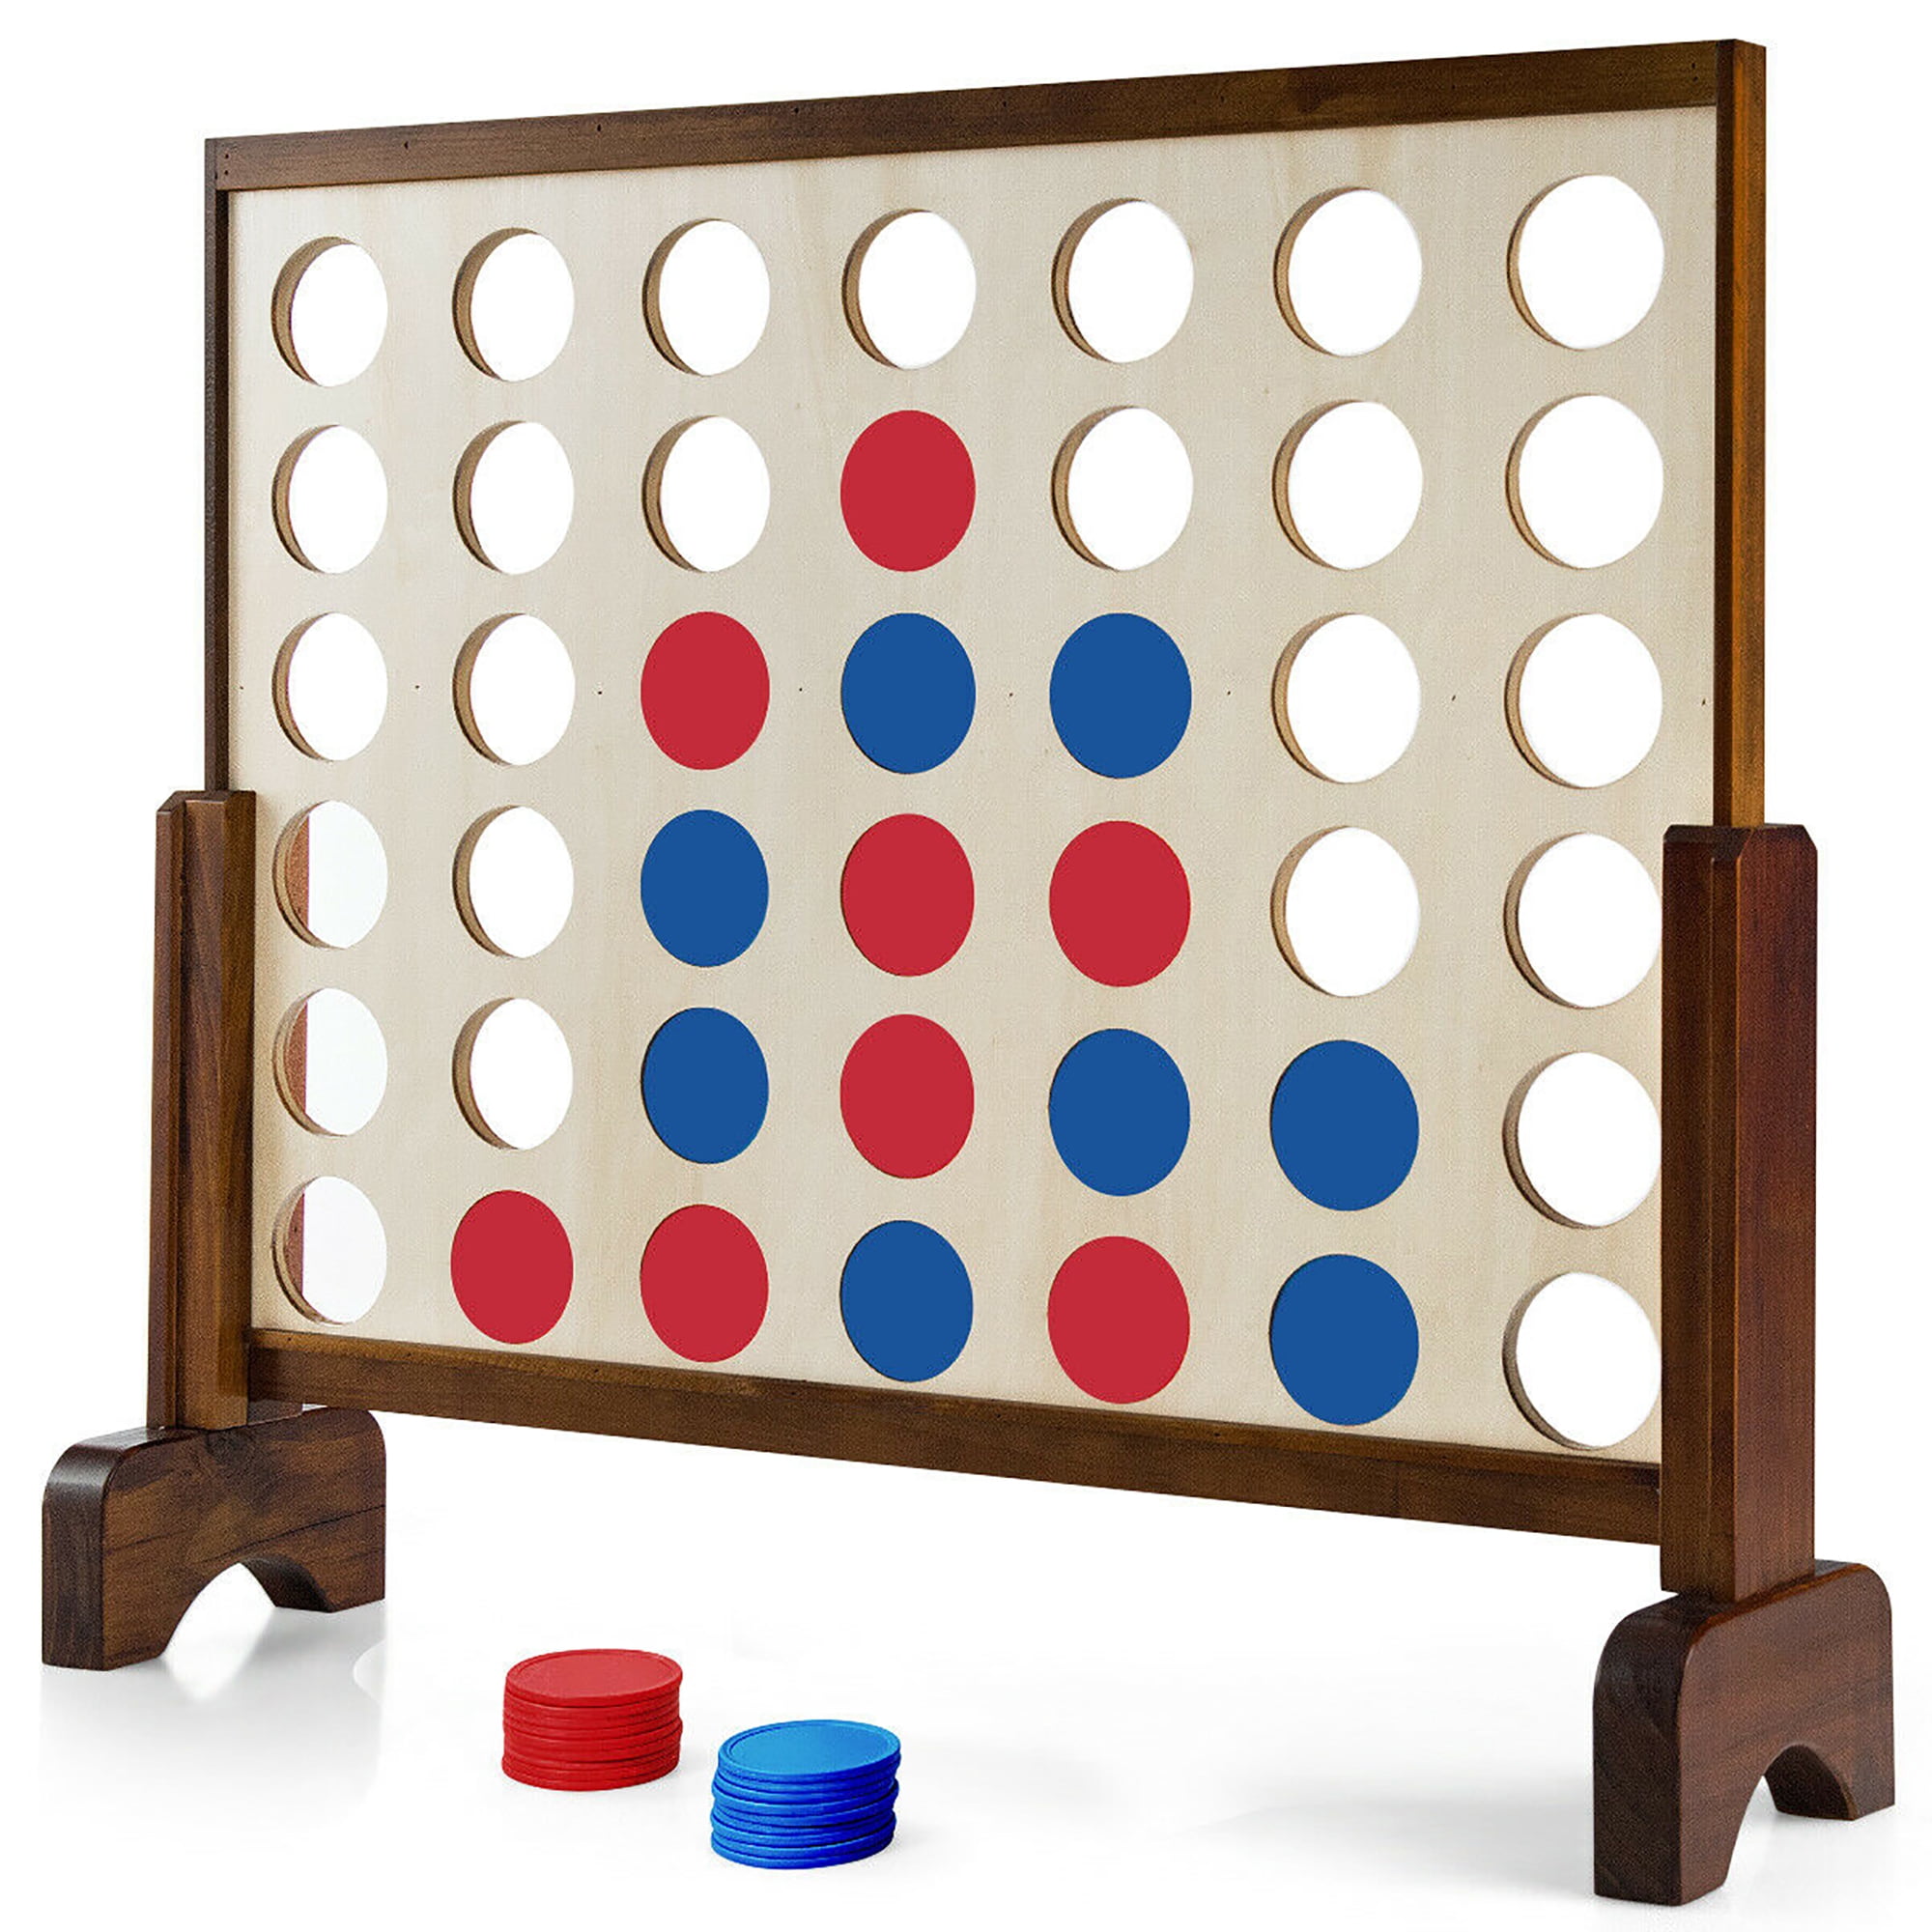 Solid Wooden Connect 4 /Four in a Line Travel Game Gift Boy or Girl any age 